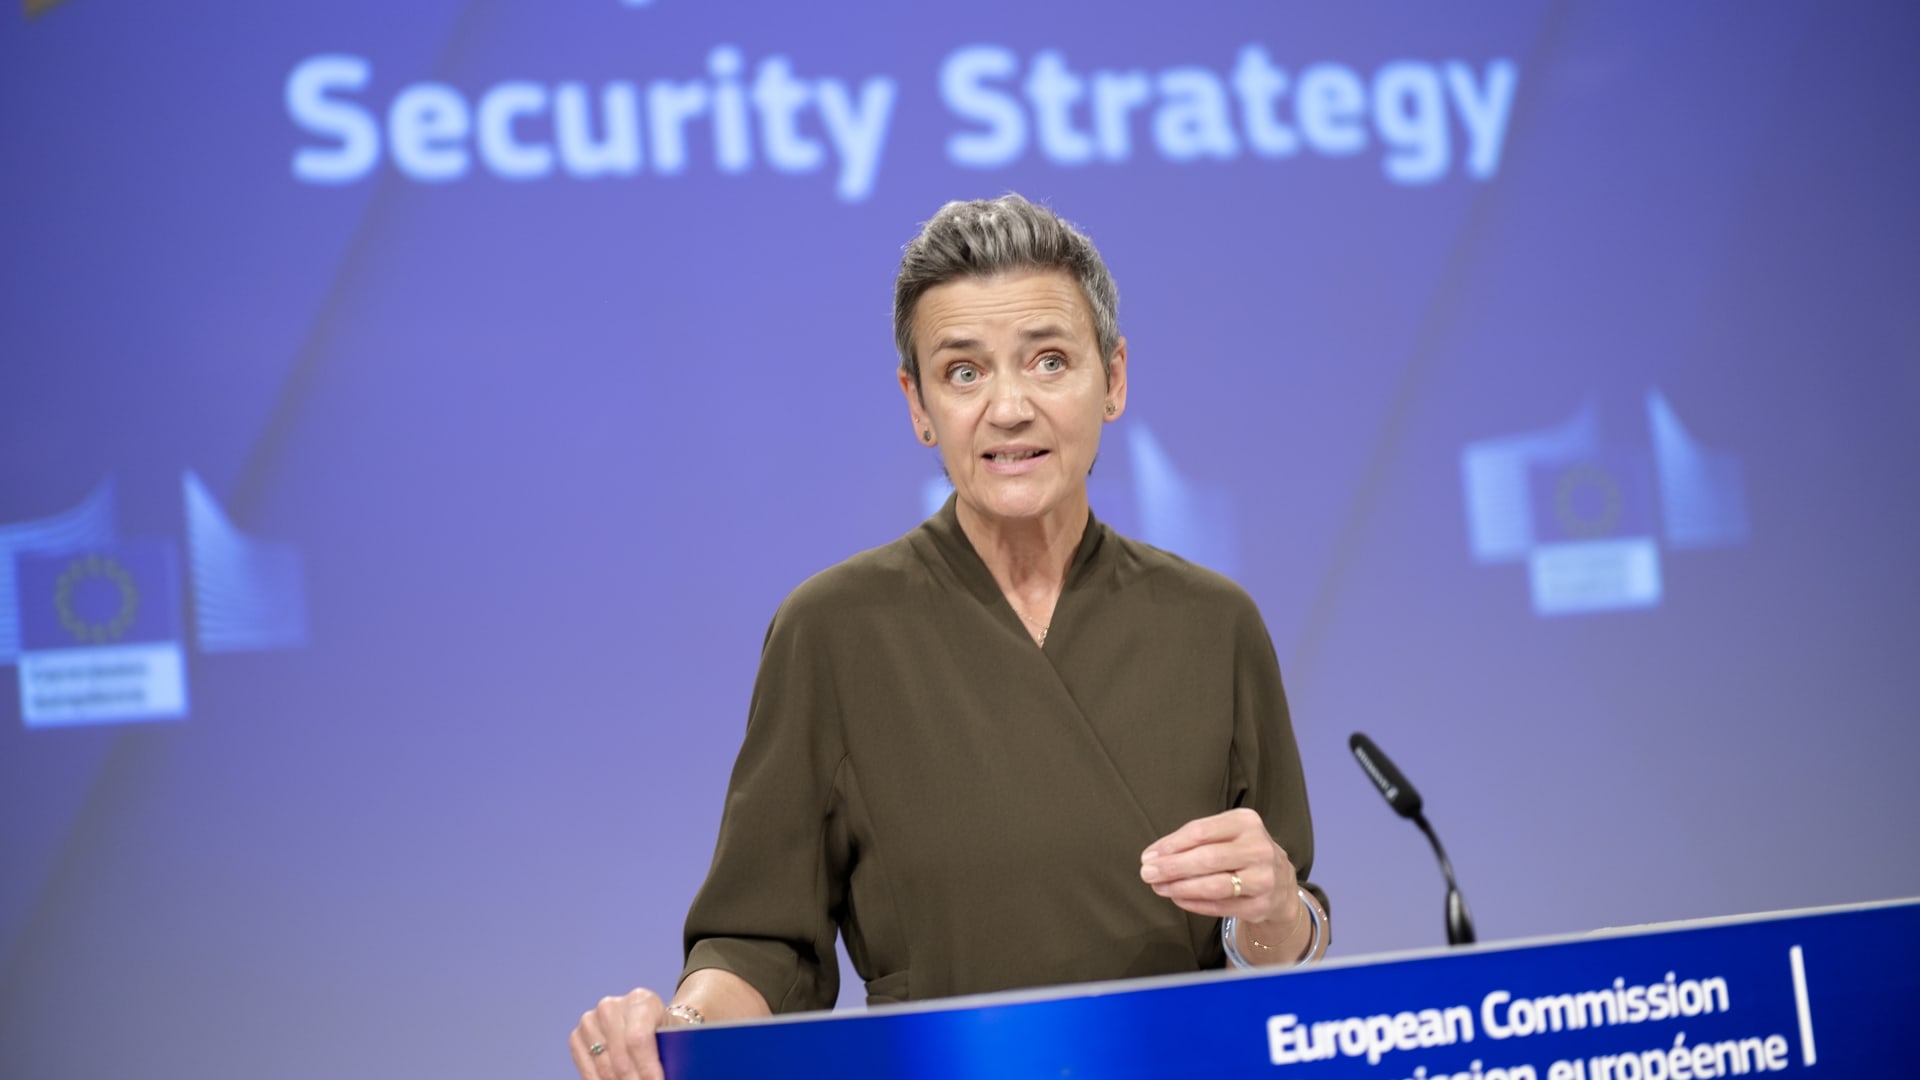 EU’s competition chief Margrethe Vestager under fire for hiring a U.S. economist